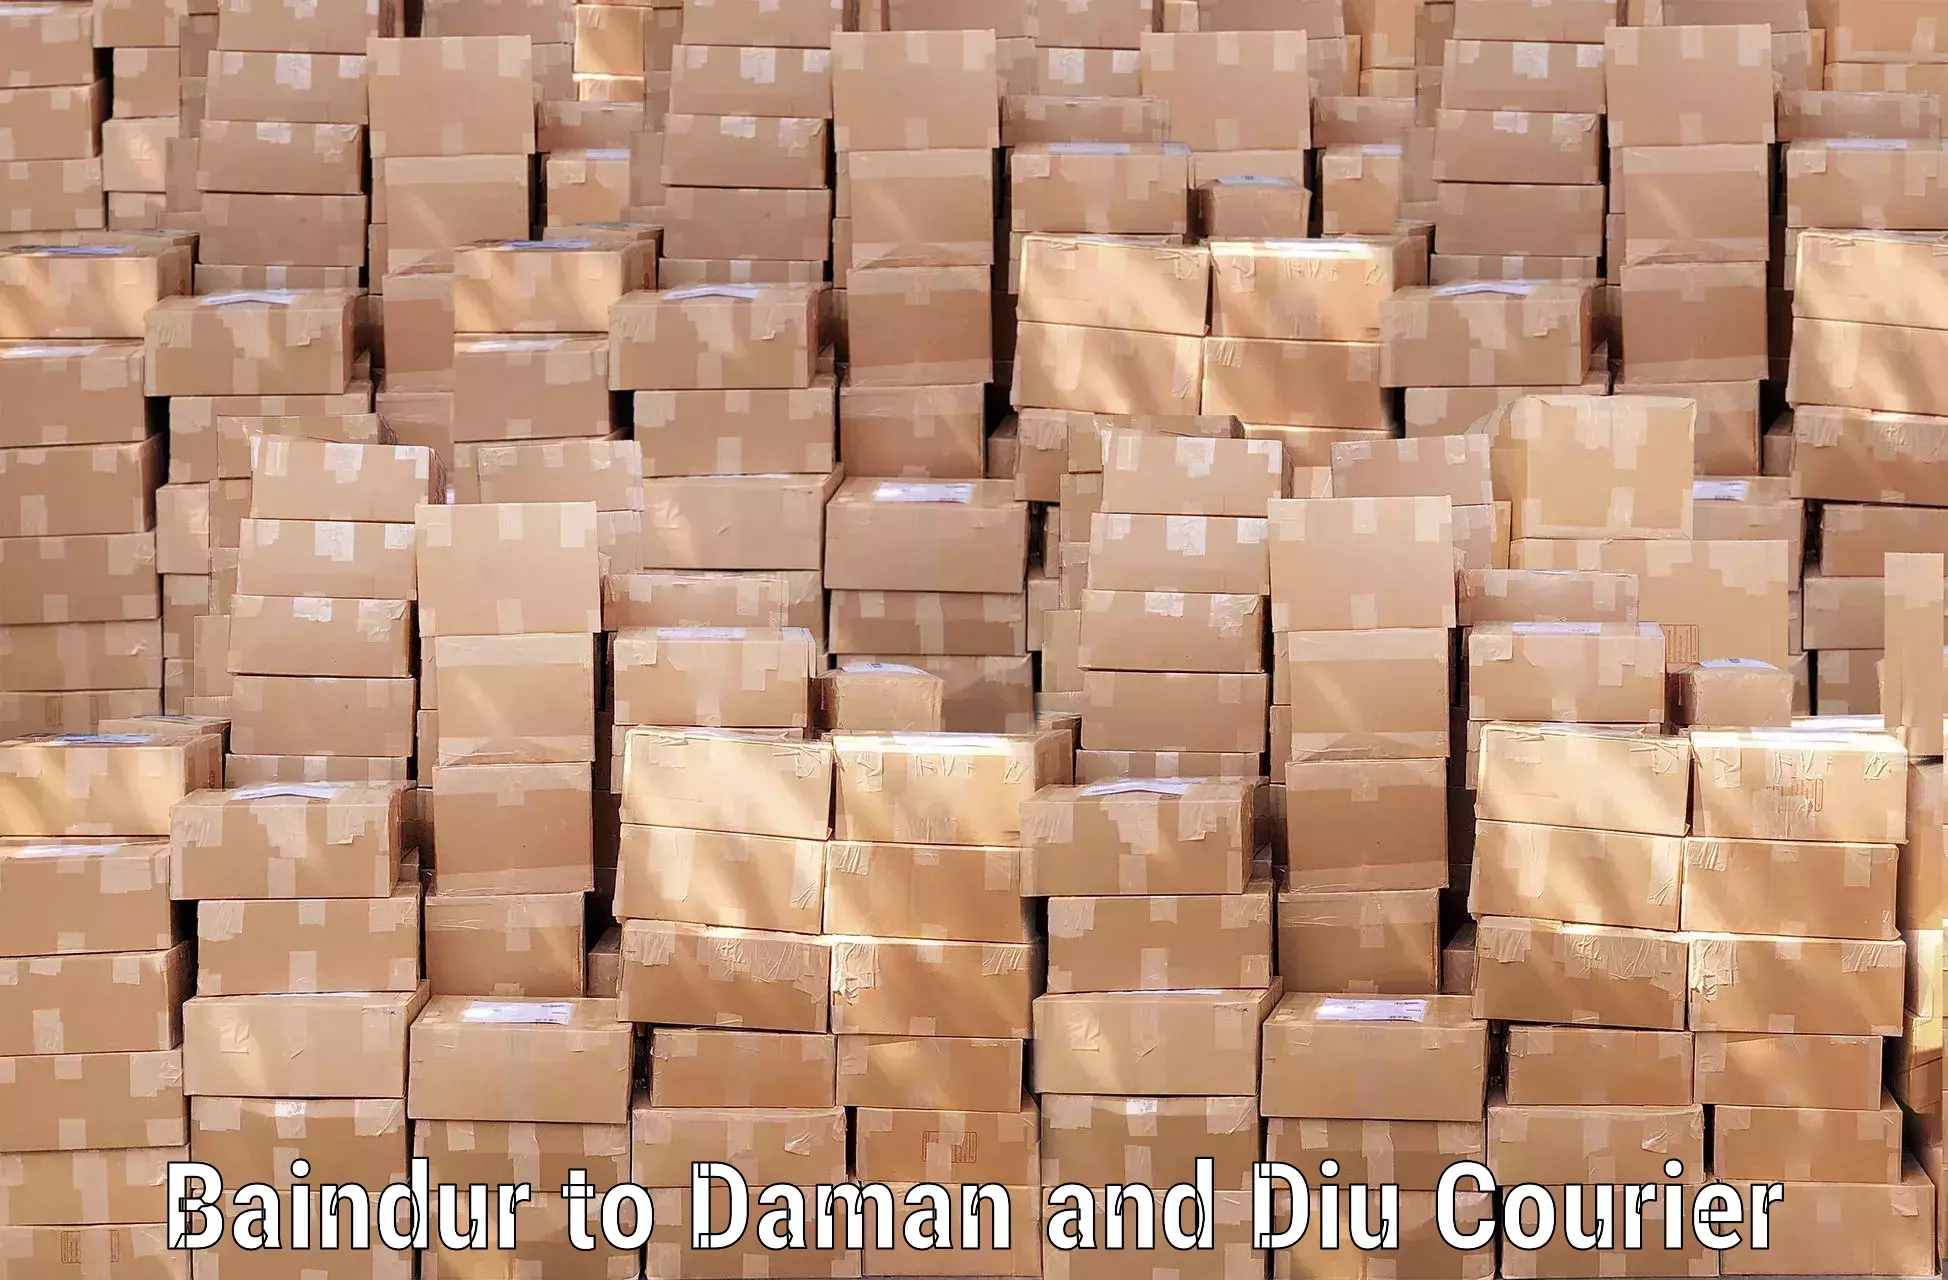 Luggage shipping specialists Baindur to Daman and Diu